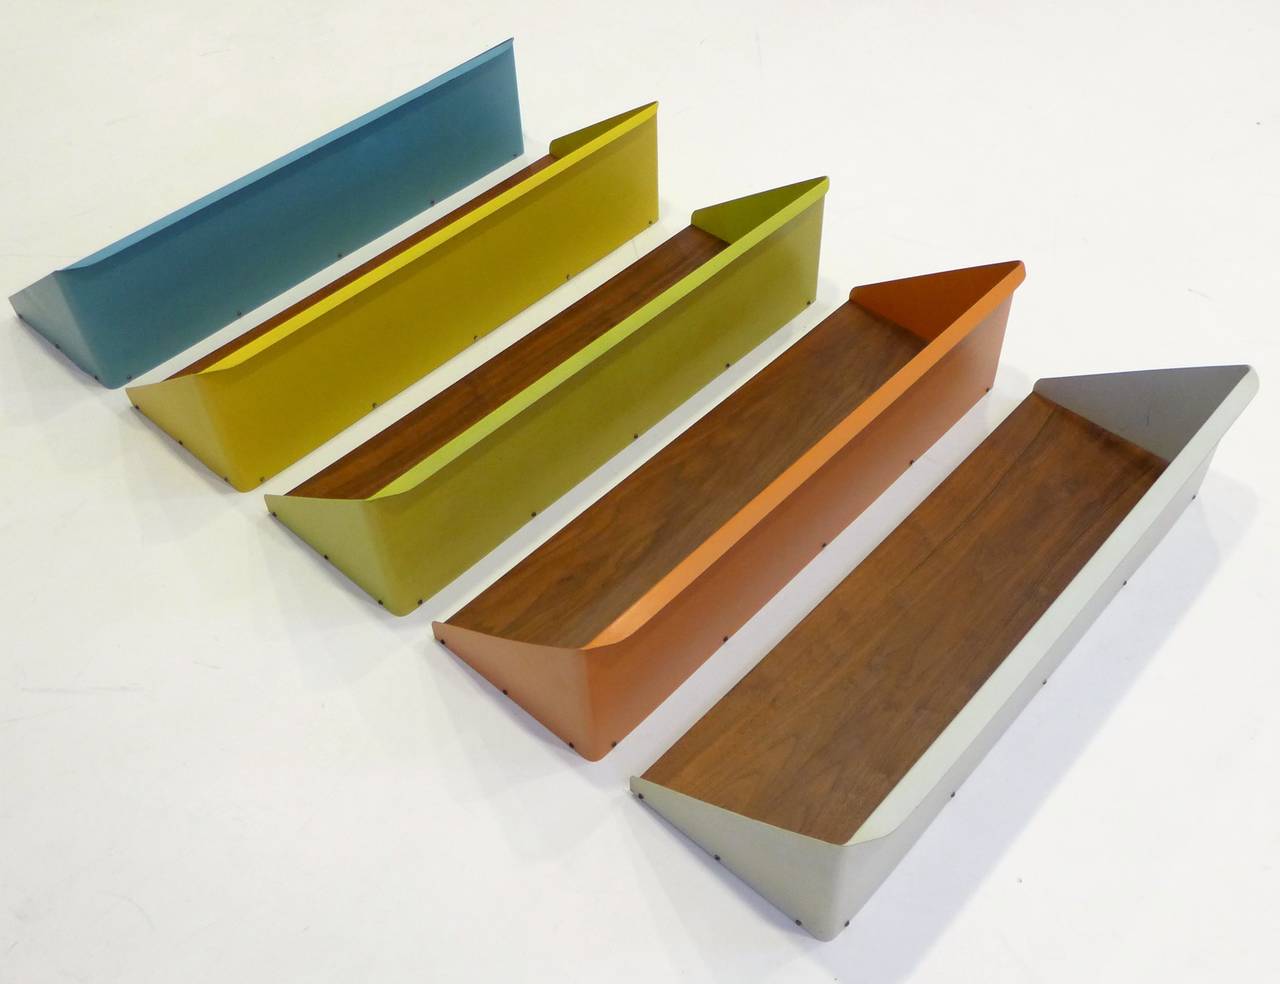 Five hanging shelves of bent and lacquered sheet metal and walnut, in a graduated range of colors, with a very Mad Men look.  Most likely from Denmark, 1960's, though the colors also have a California 1960's vibe. Maybe Cado meets Peter Pepper